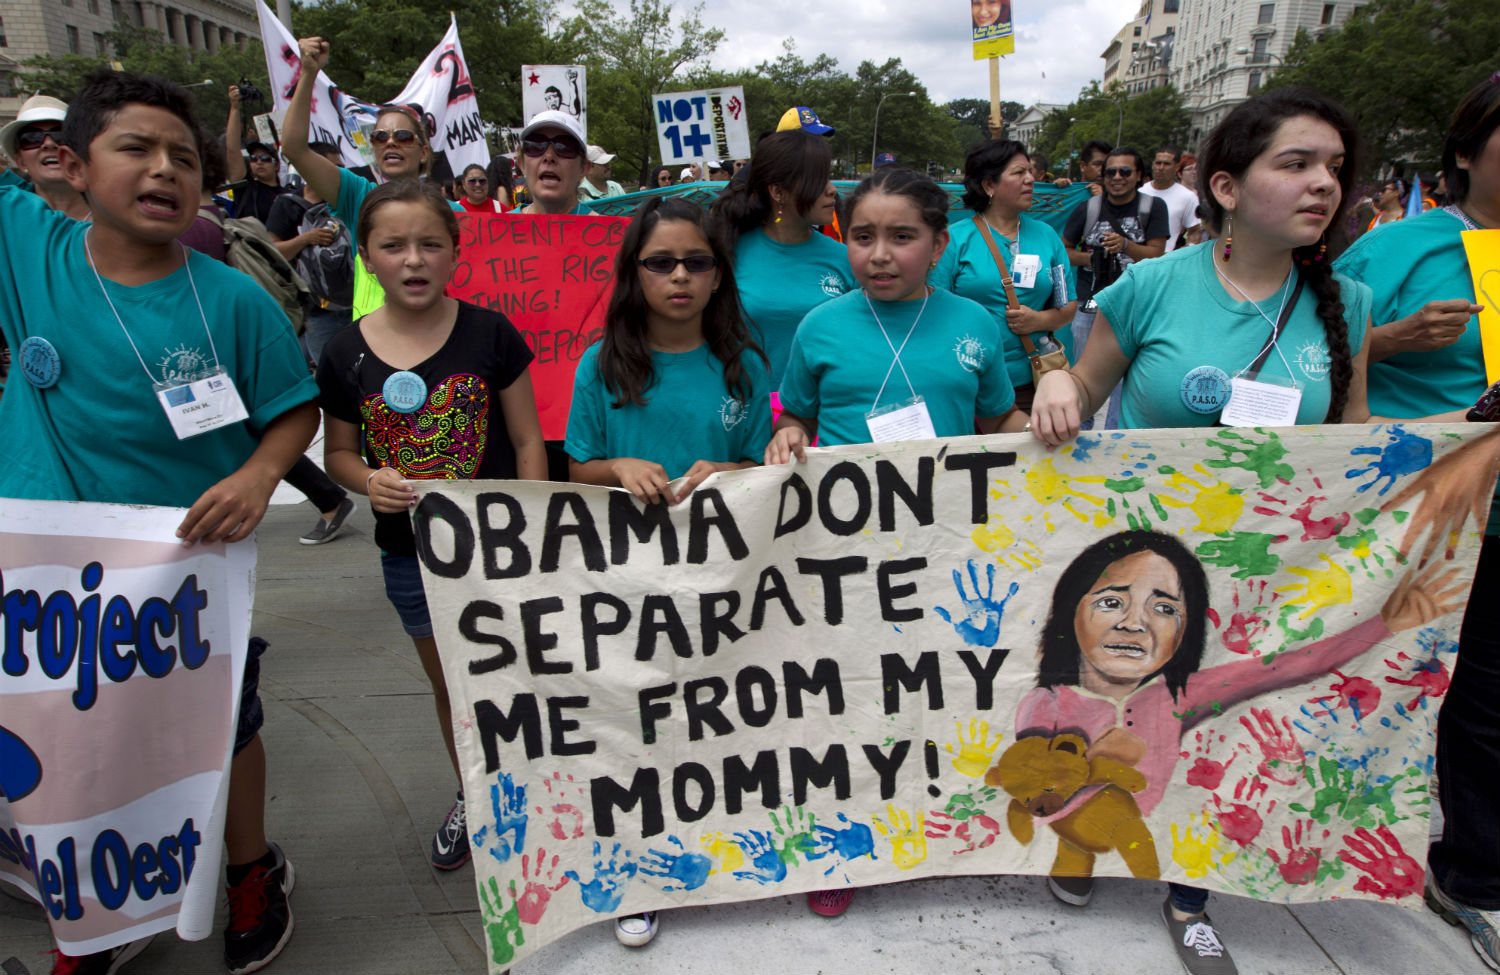 Betrayed by Obama, Latino Activists Debate Boycotting the 2014 Midterms